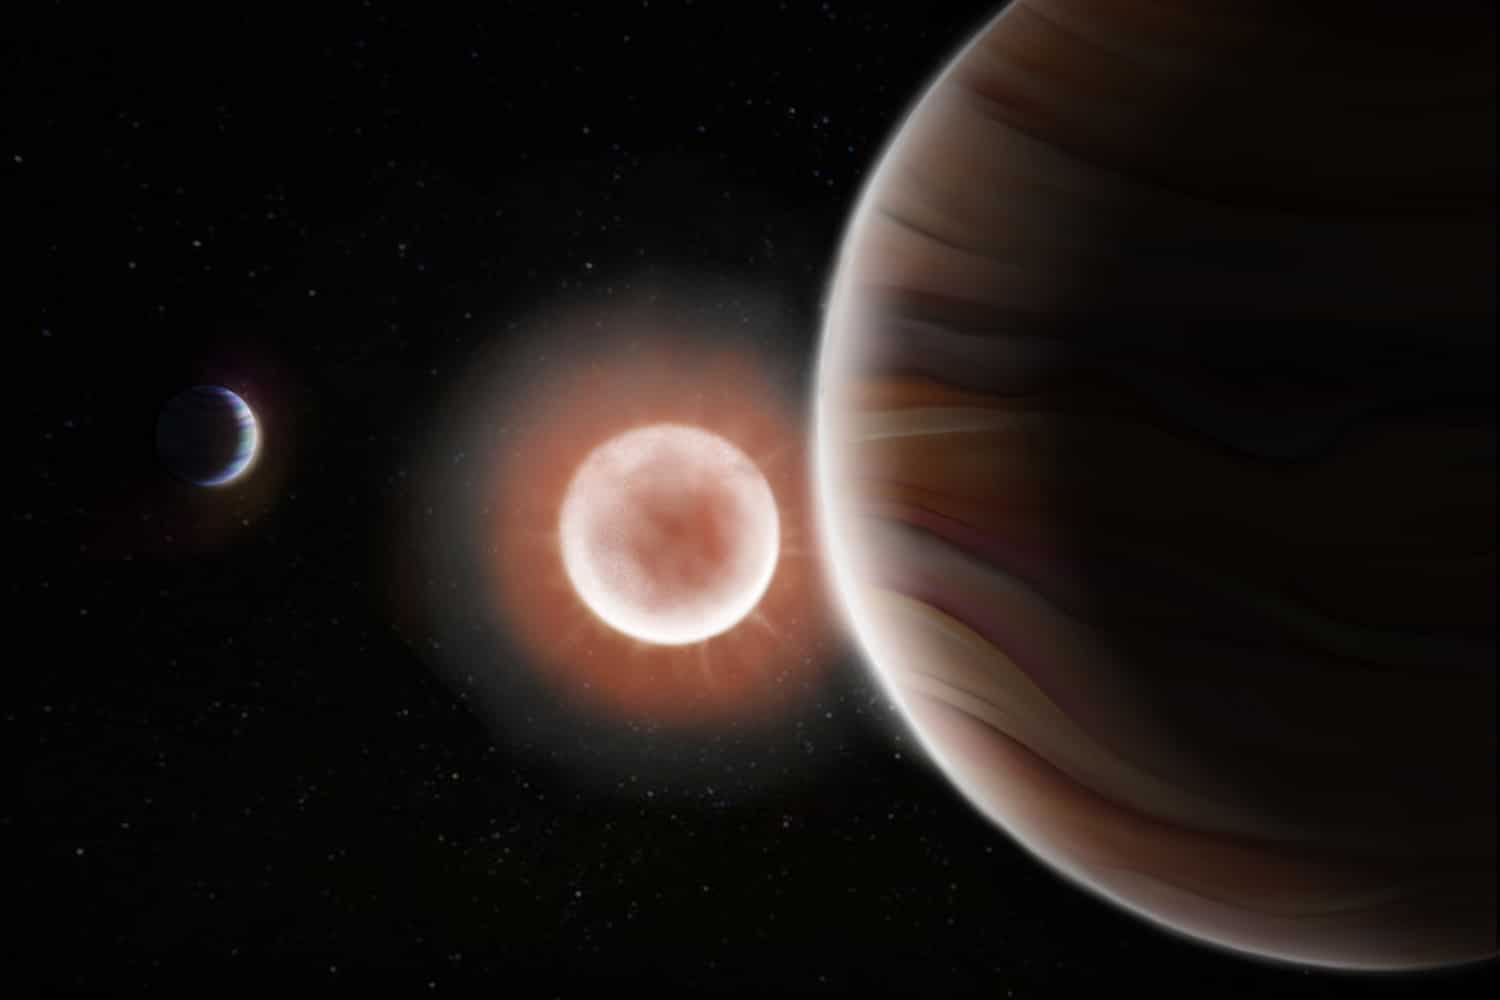 Astronomers discovered a rare system containing two long-period planets thumbnail